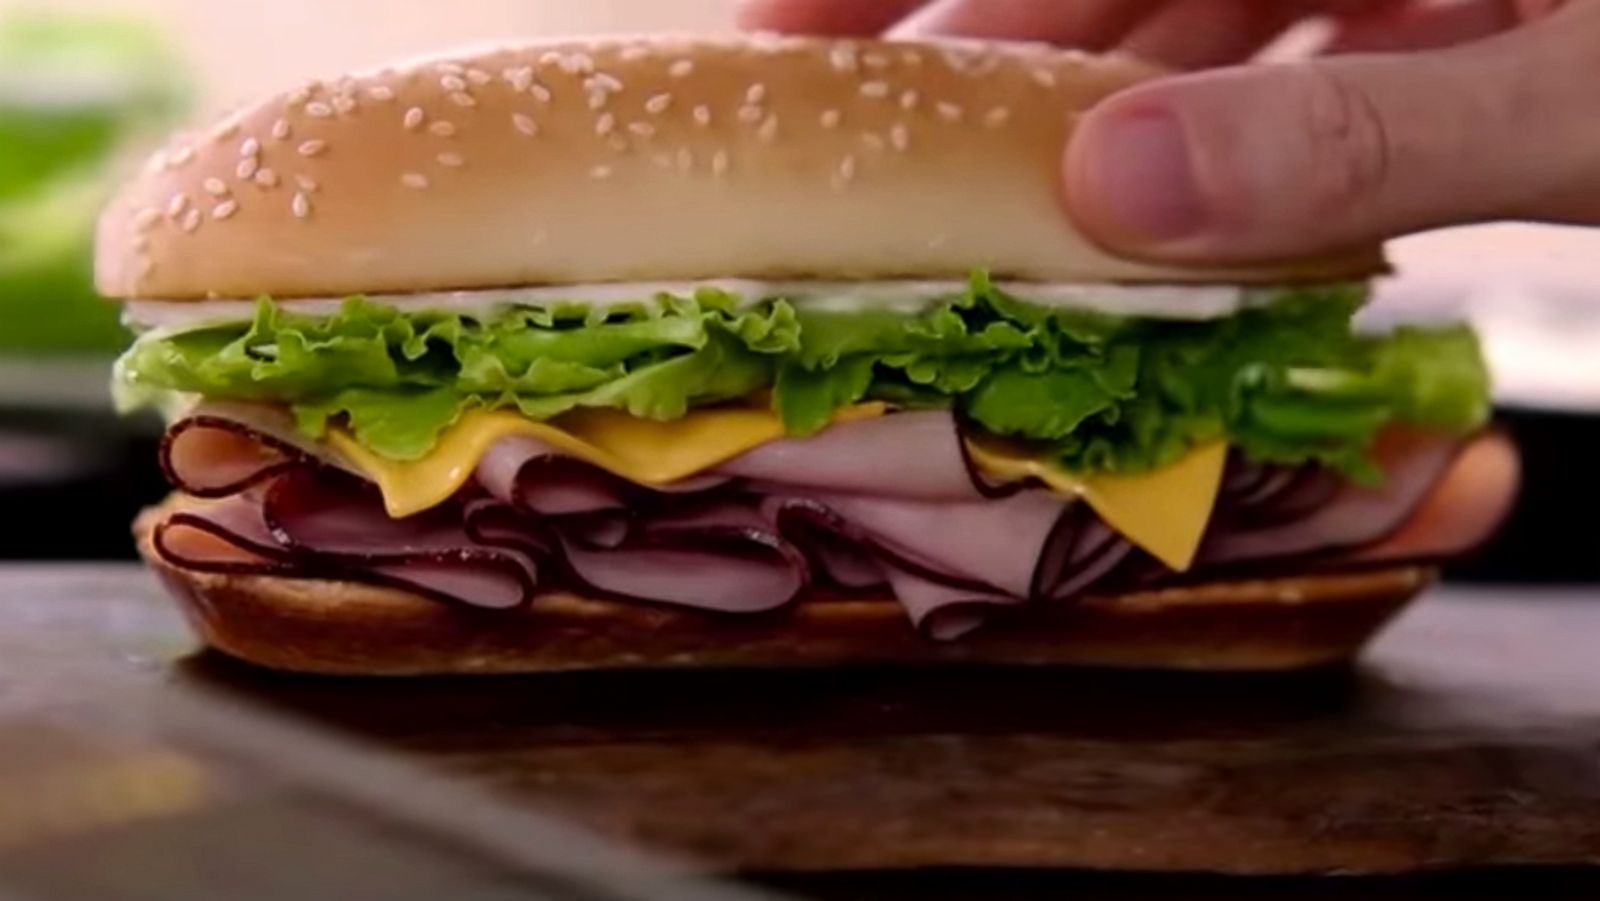 Nightmare King: Burger King says new sandwich will affect dreams